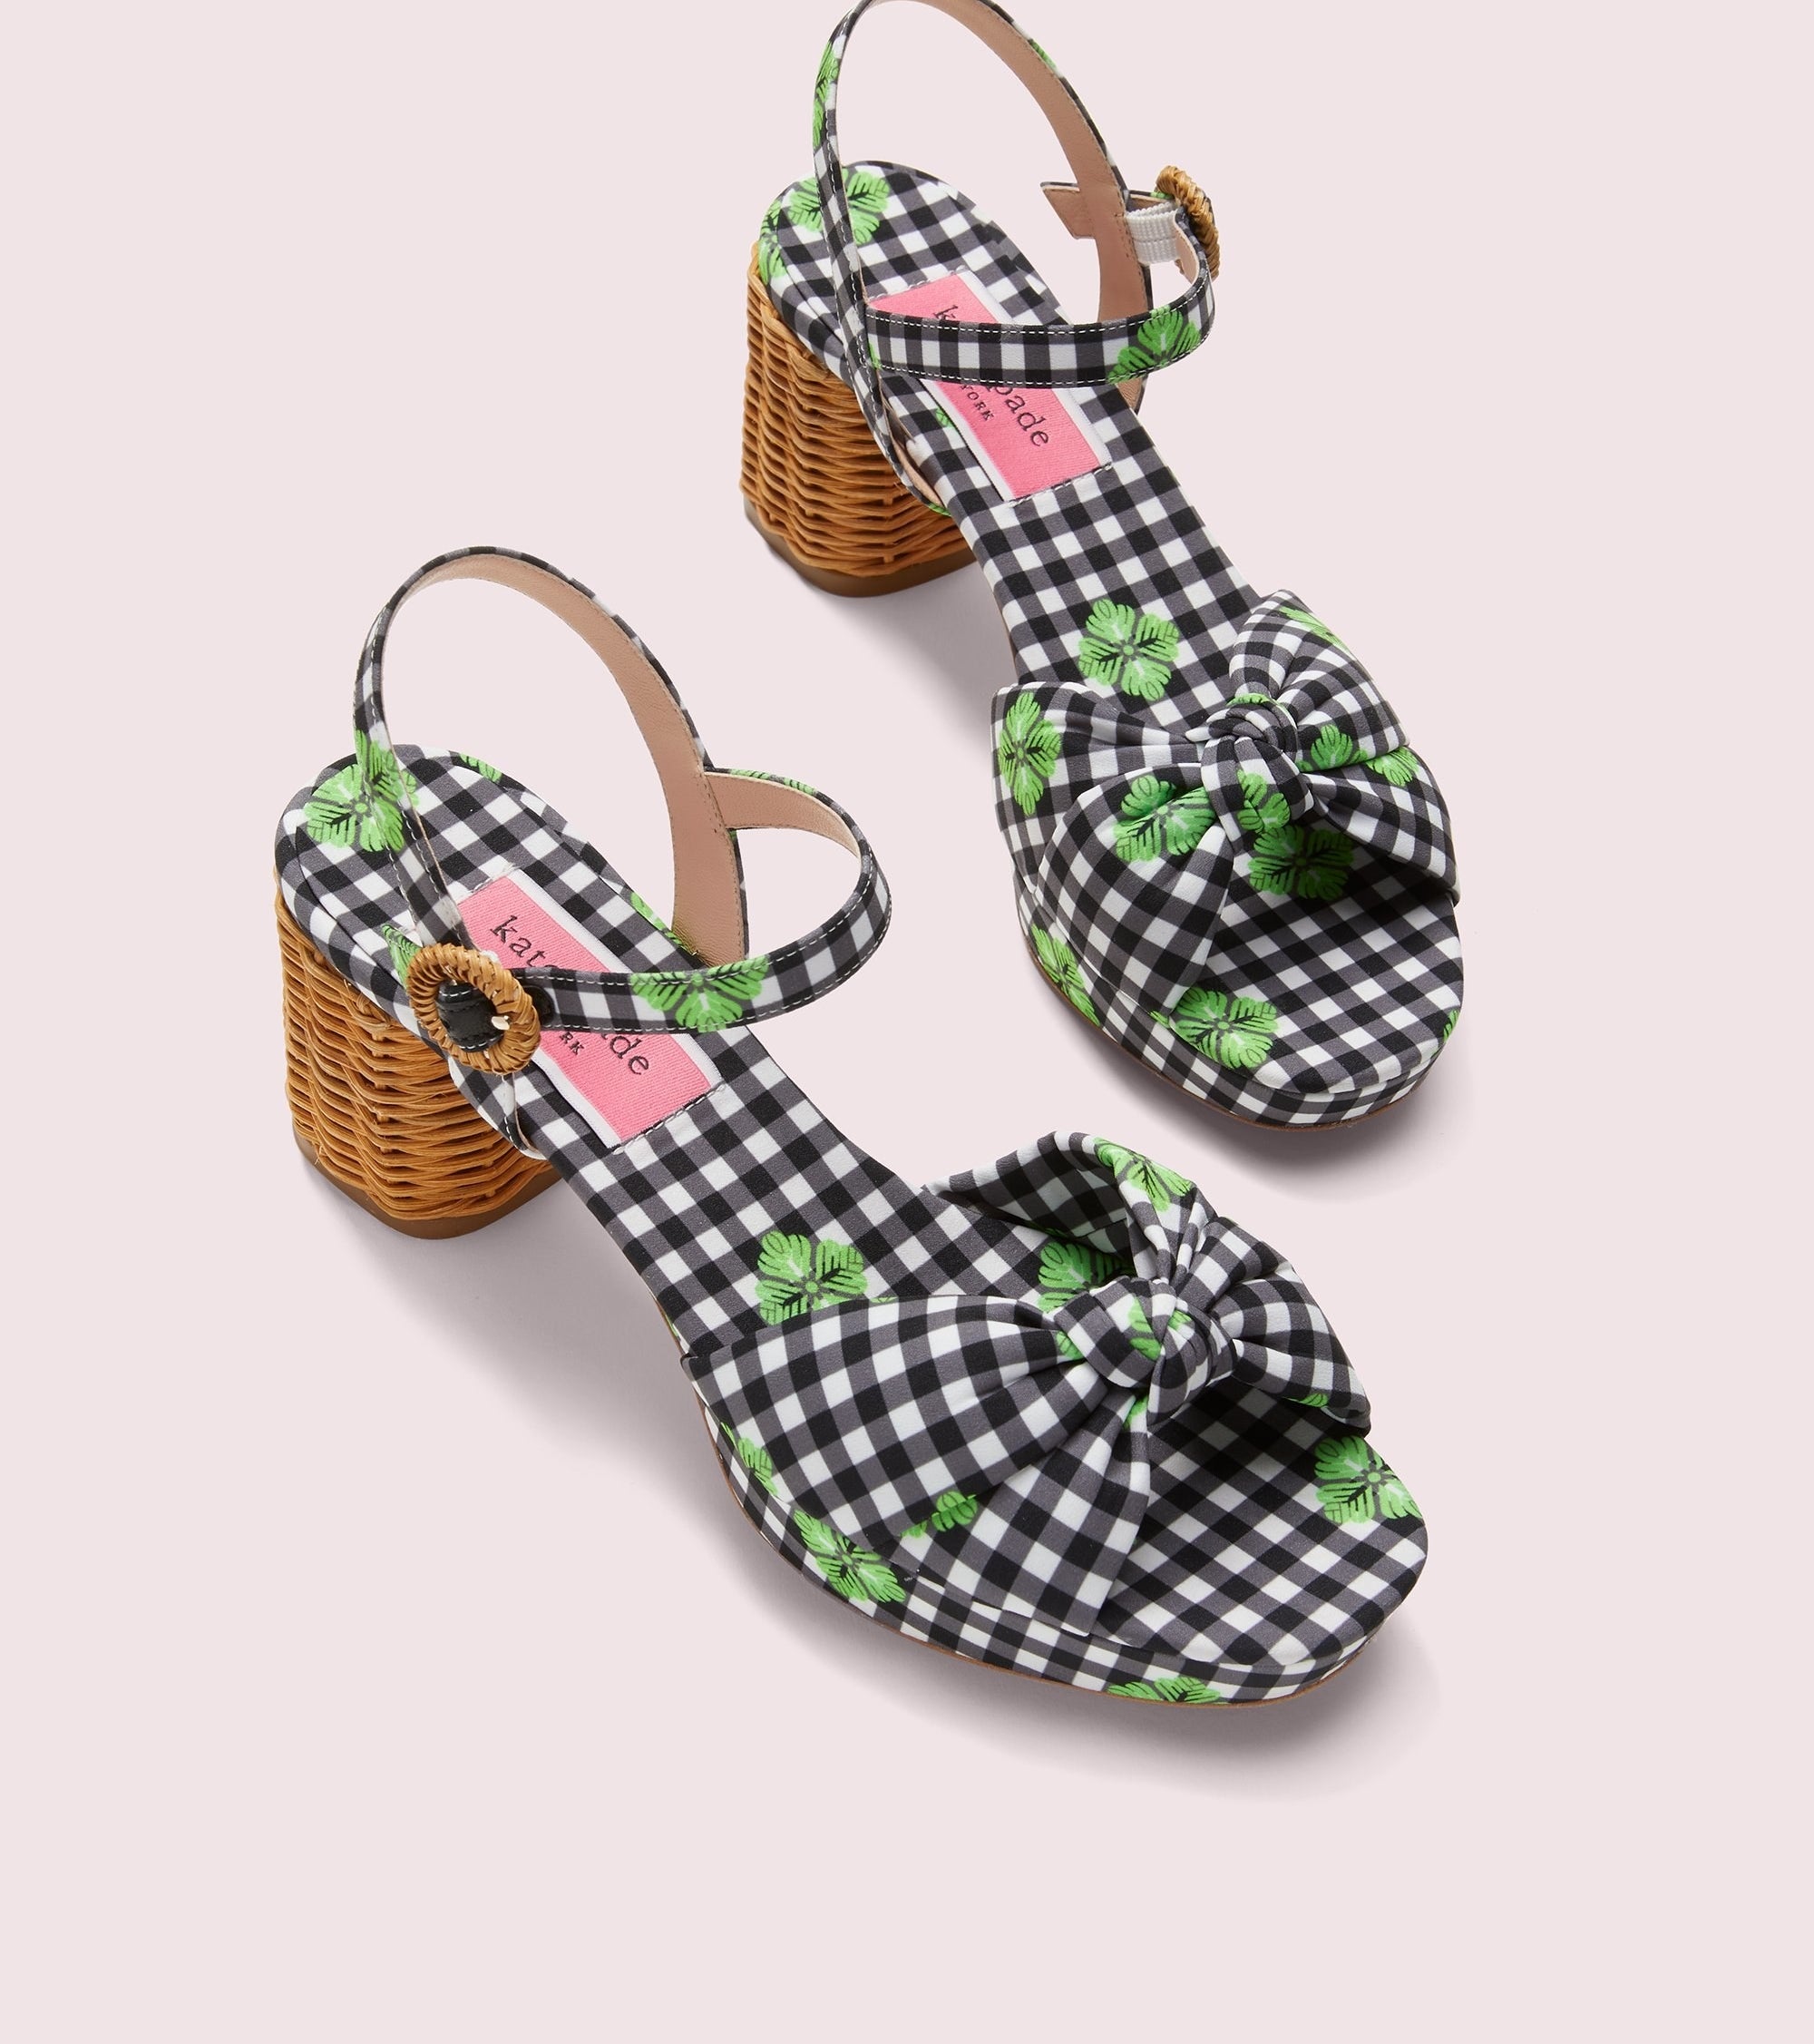 The black and white gingham sandals featuring a knot-front and wicker heels